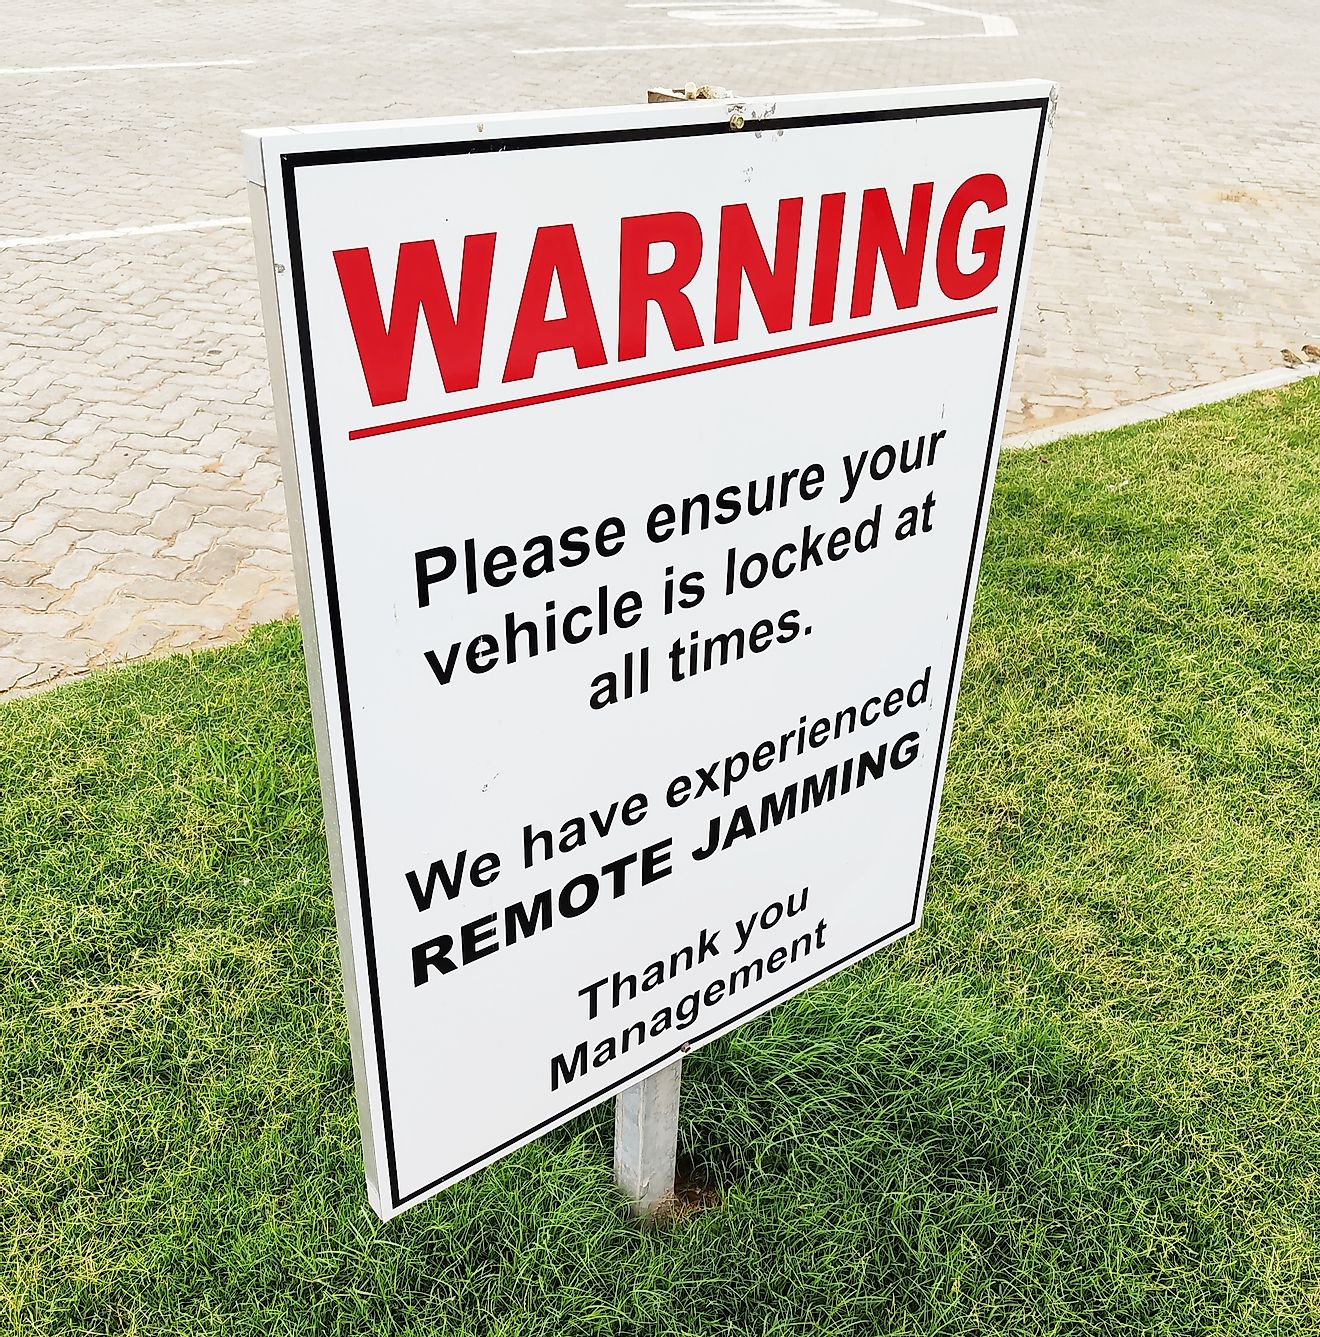 Radio jamming car theft warning sign in South Africa. Image credit: MD_Photography/Shutterstock.com